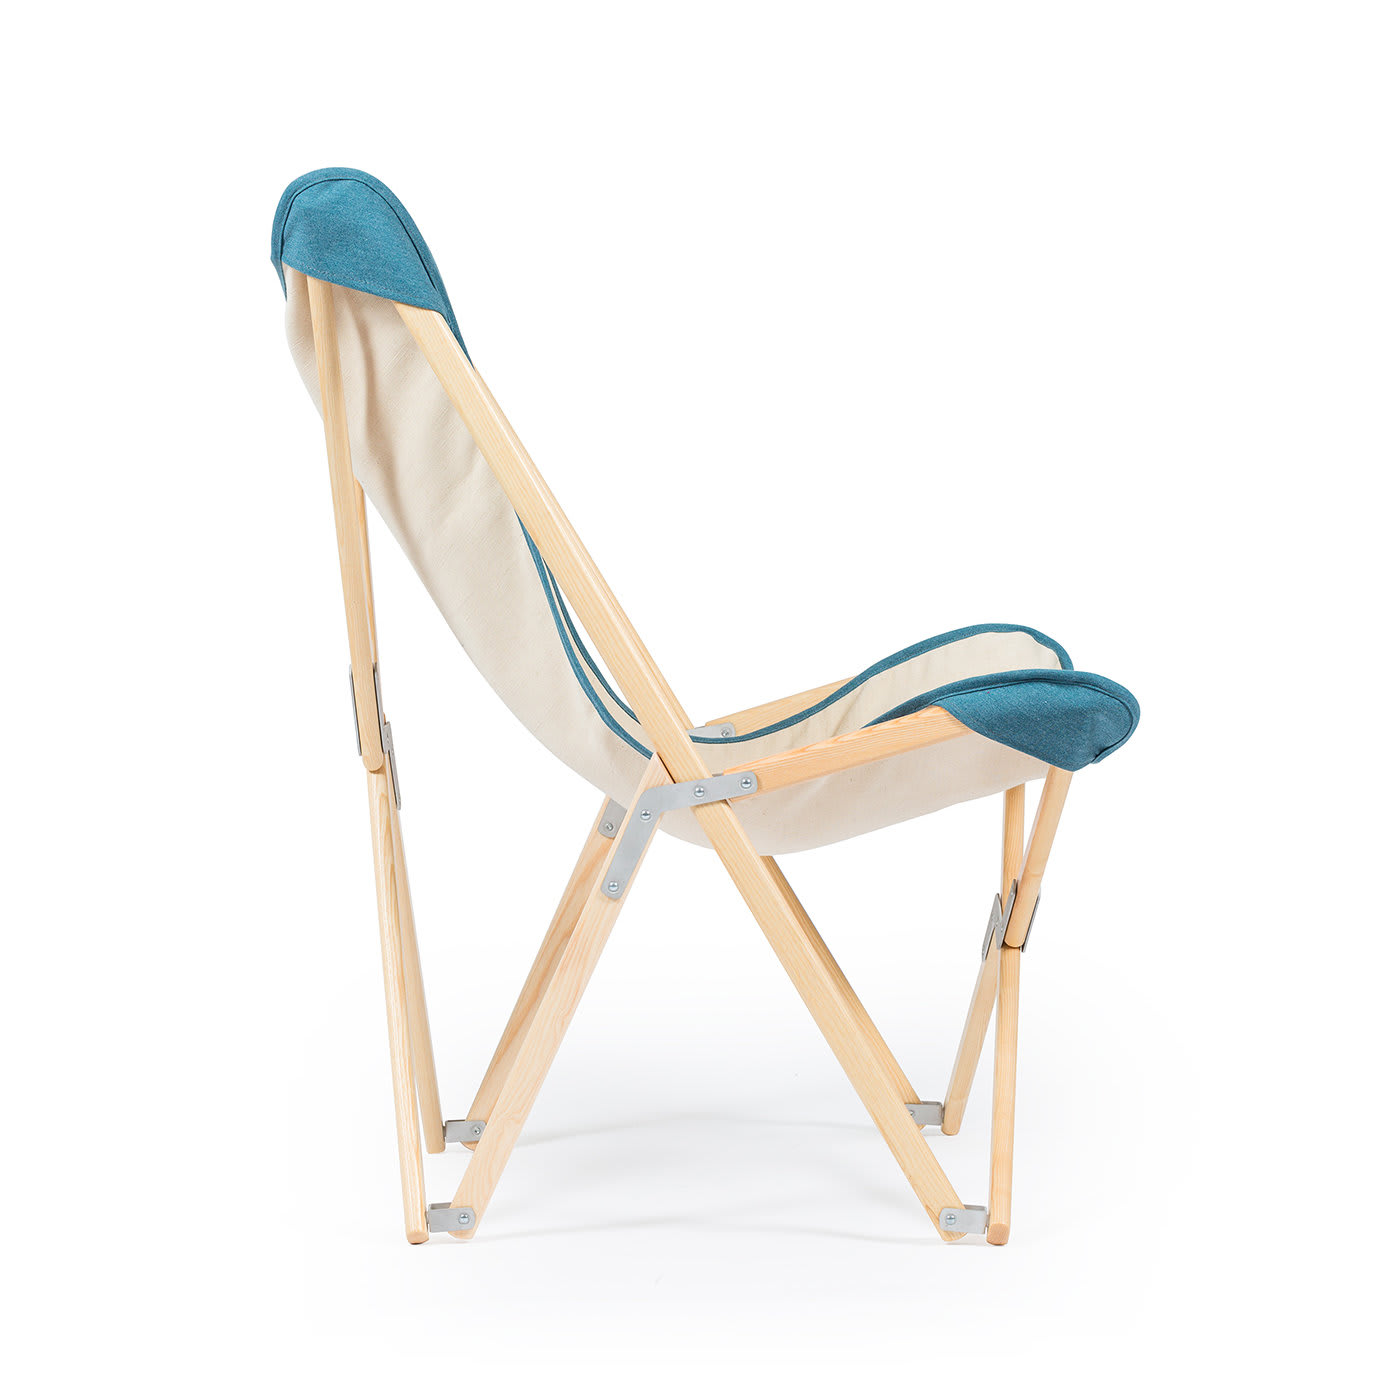 Tripolina Armchair in Cream and Teal Blue - Telami